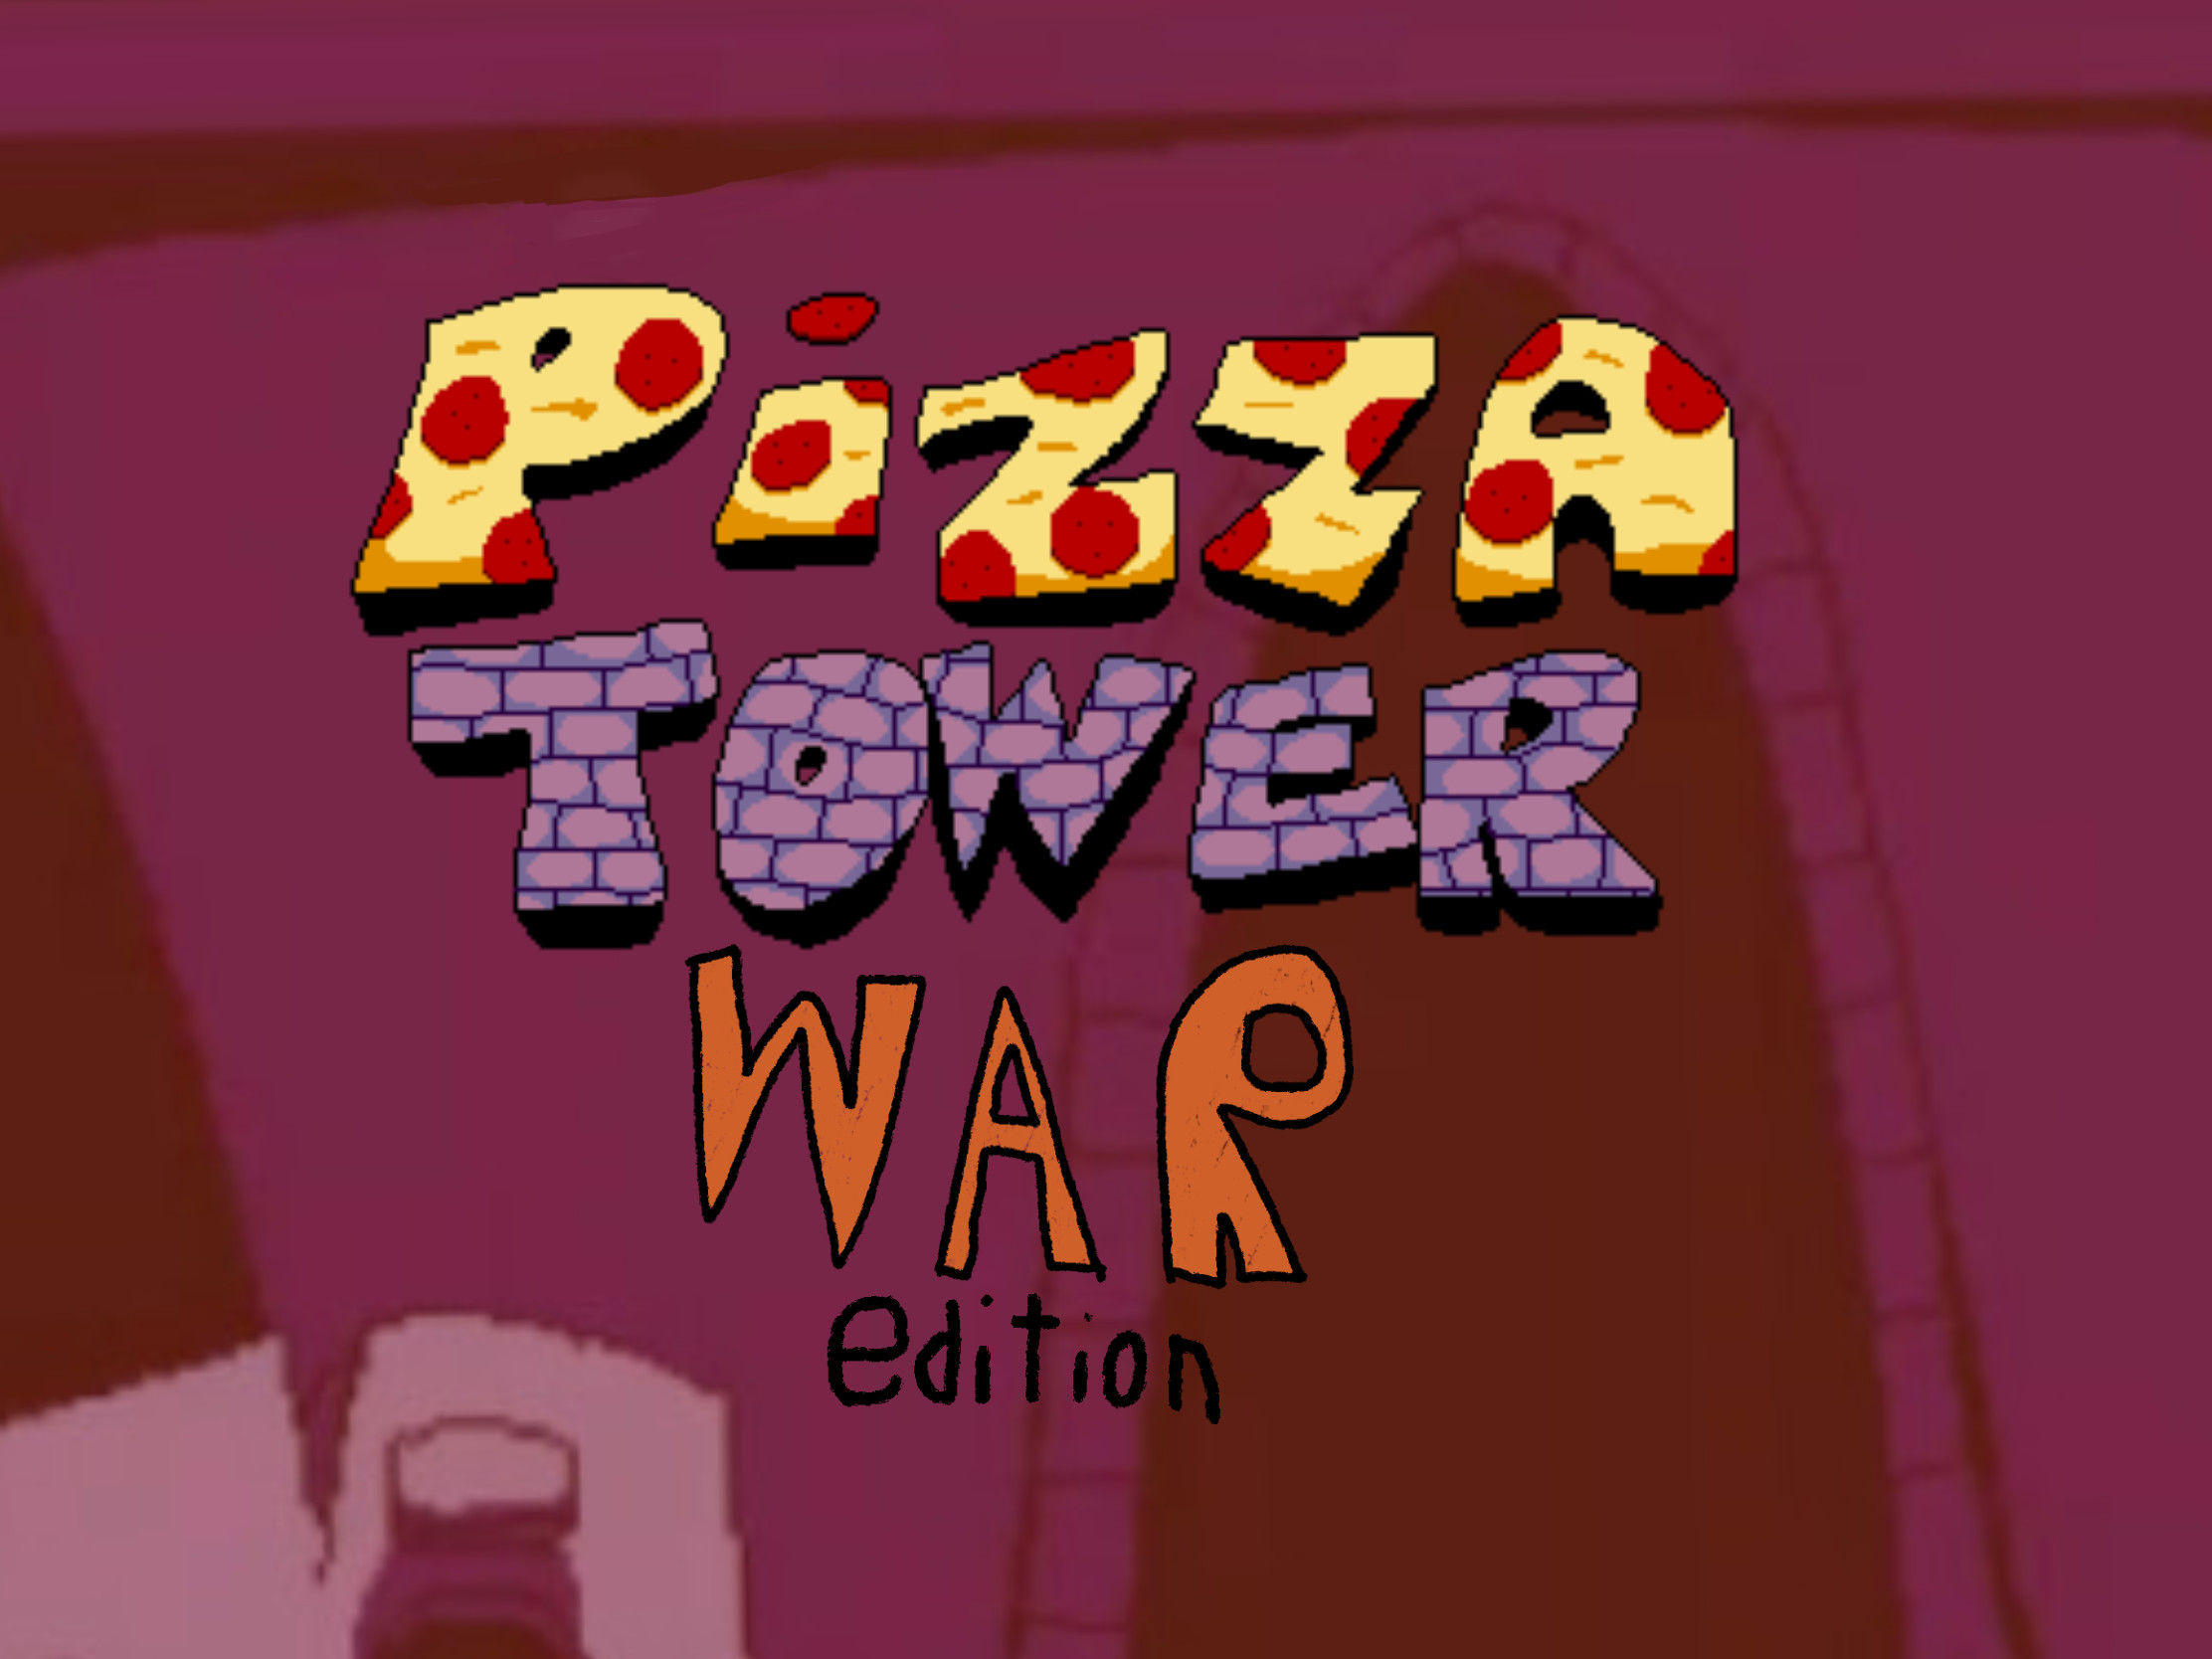 Tower Lobby - Pizza Tower Wiki